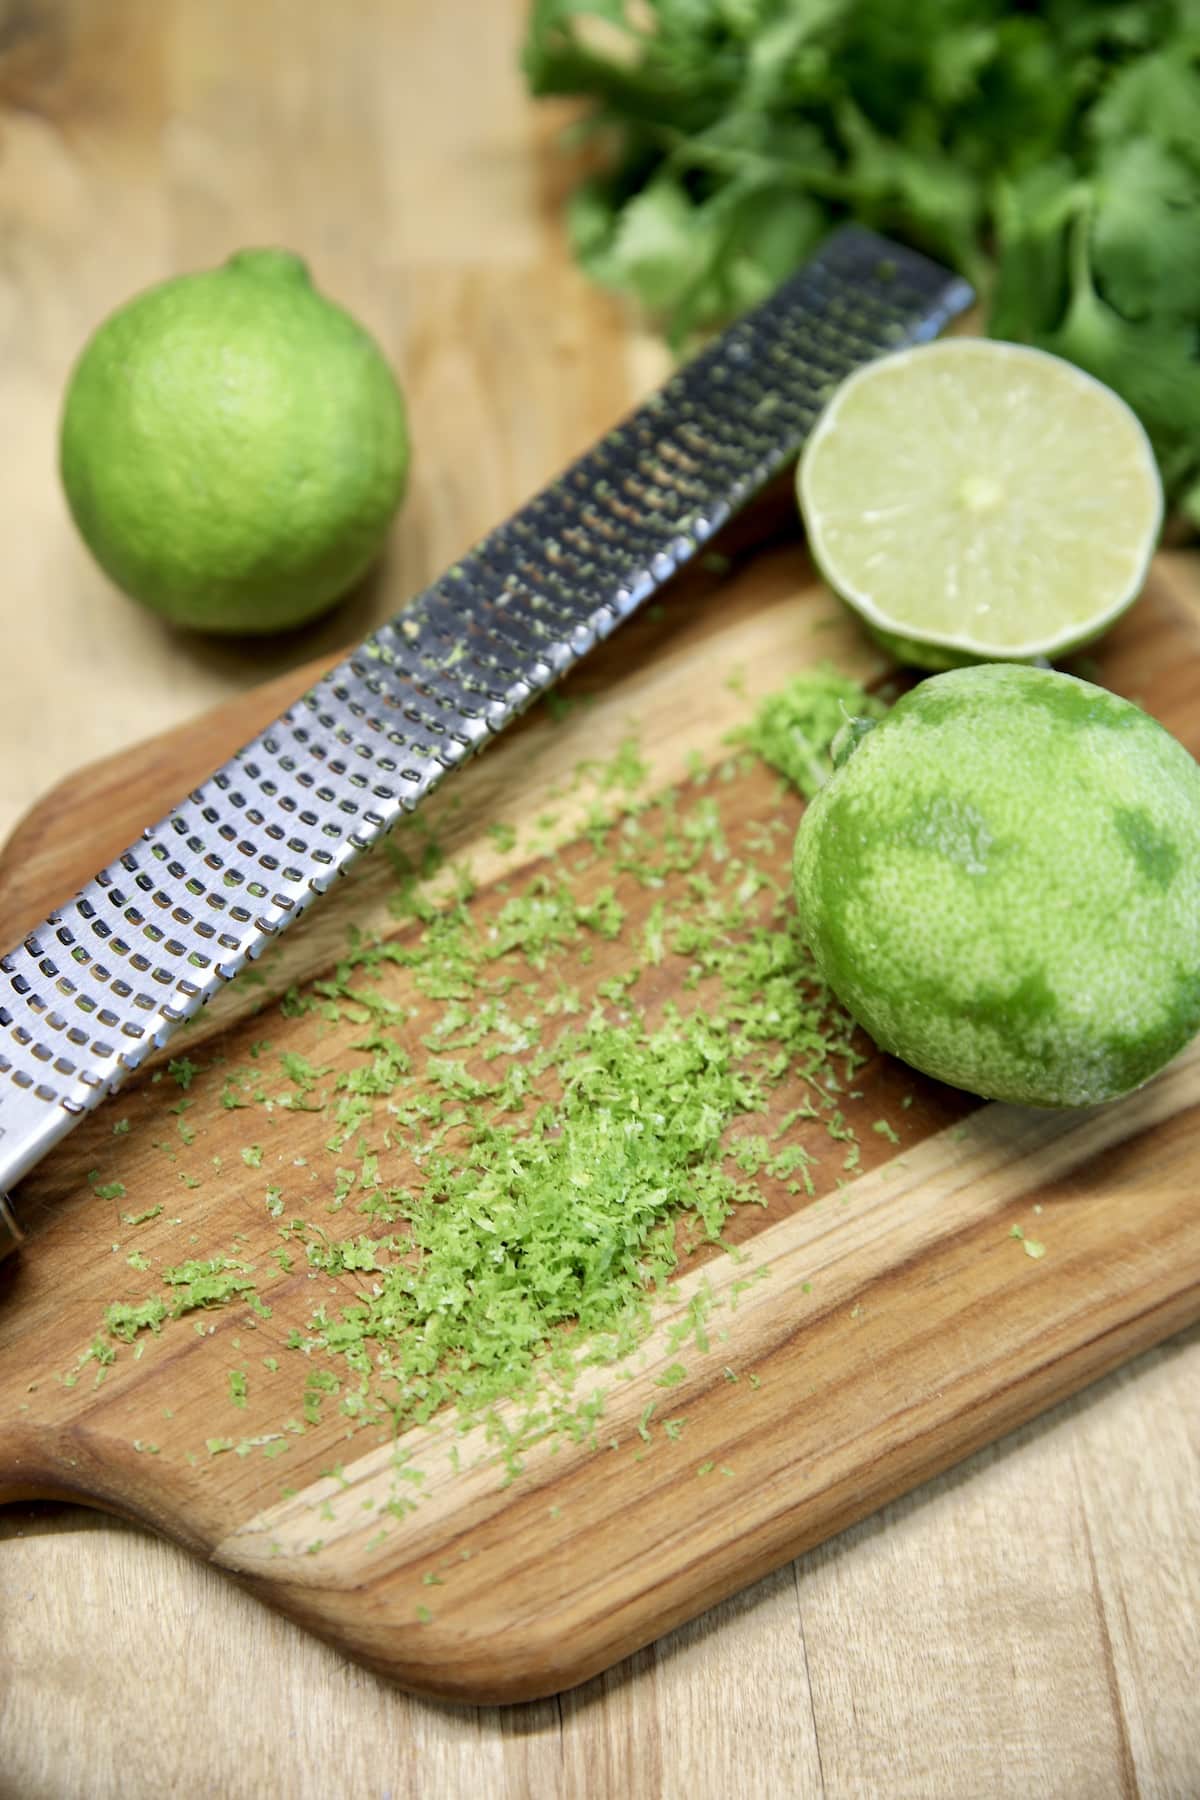 Zesting limes on a cutting board.